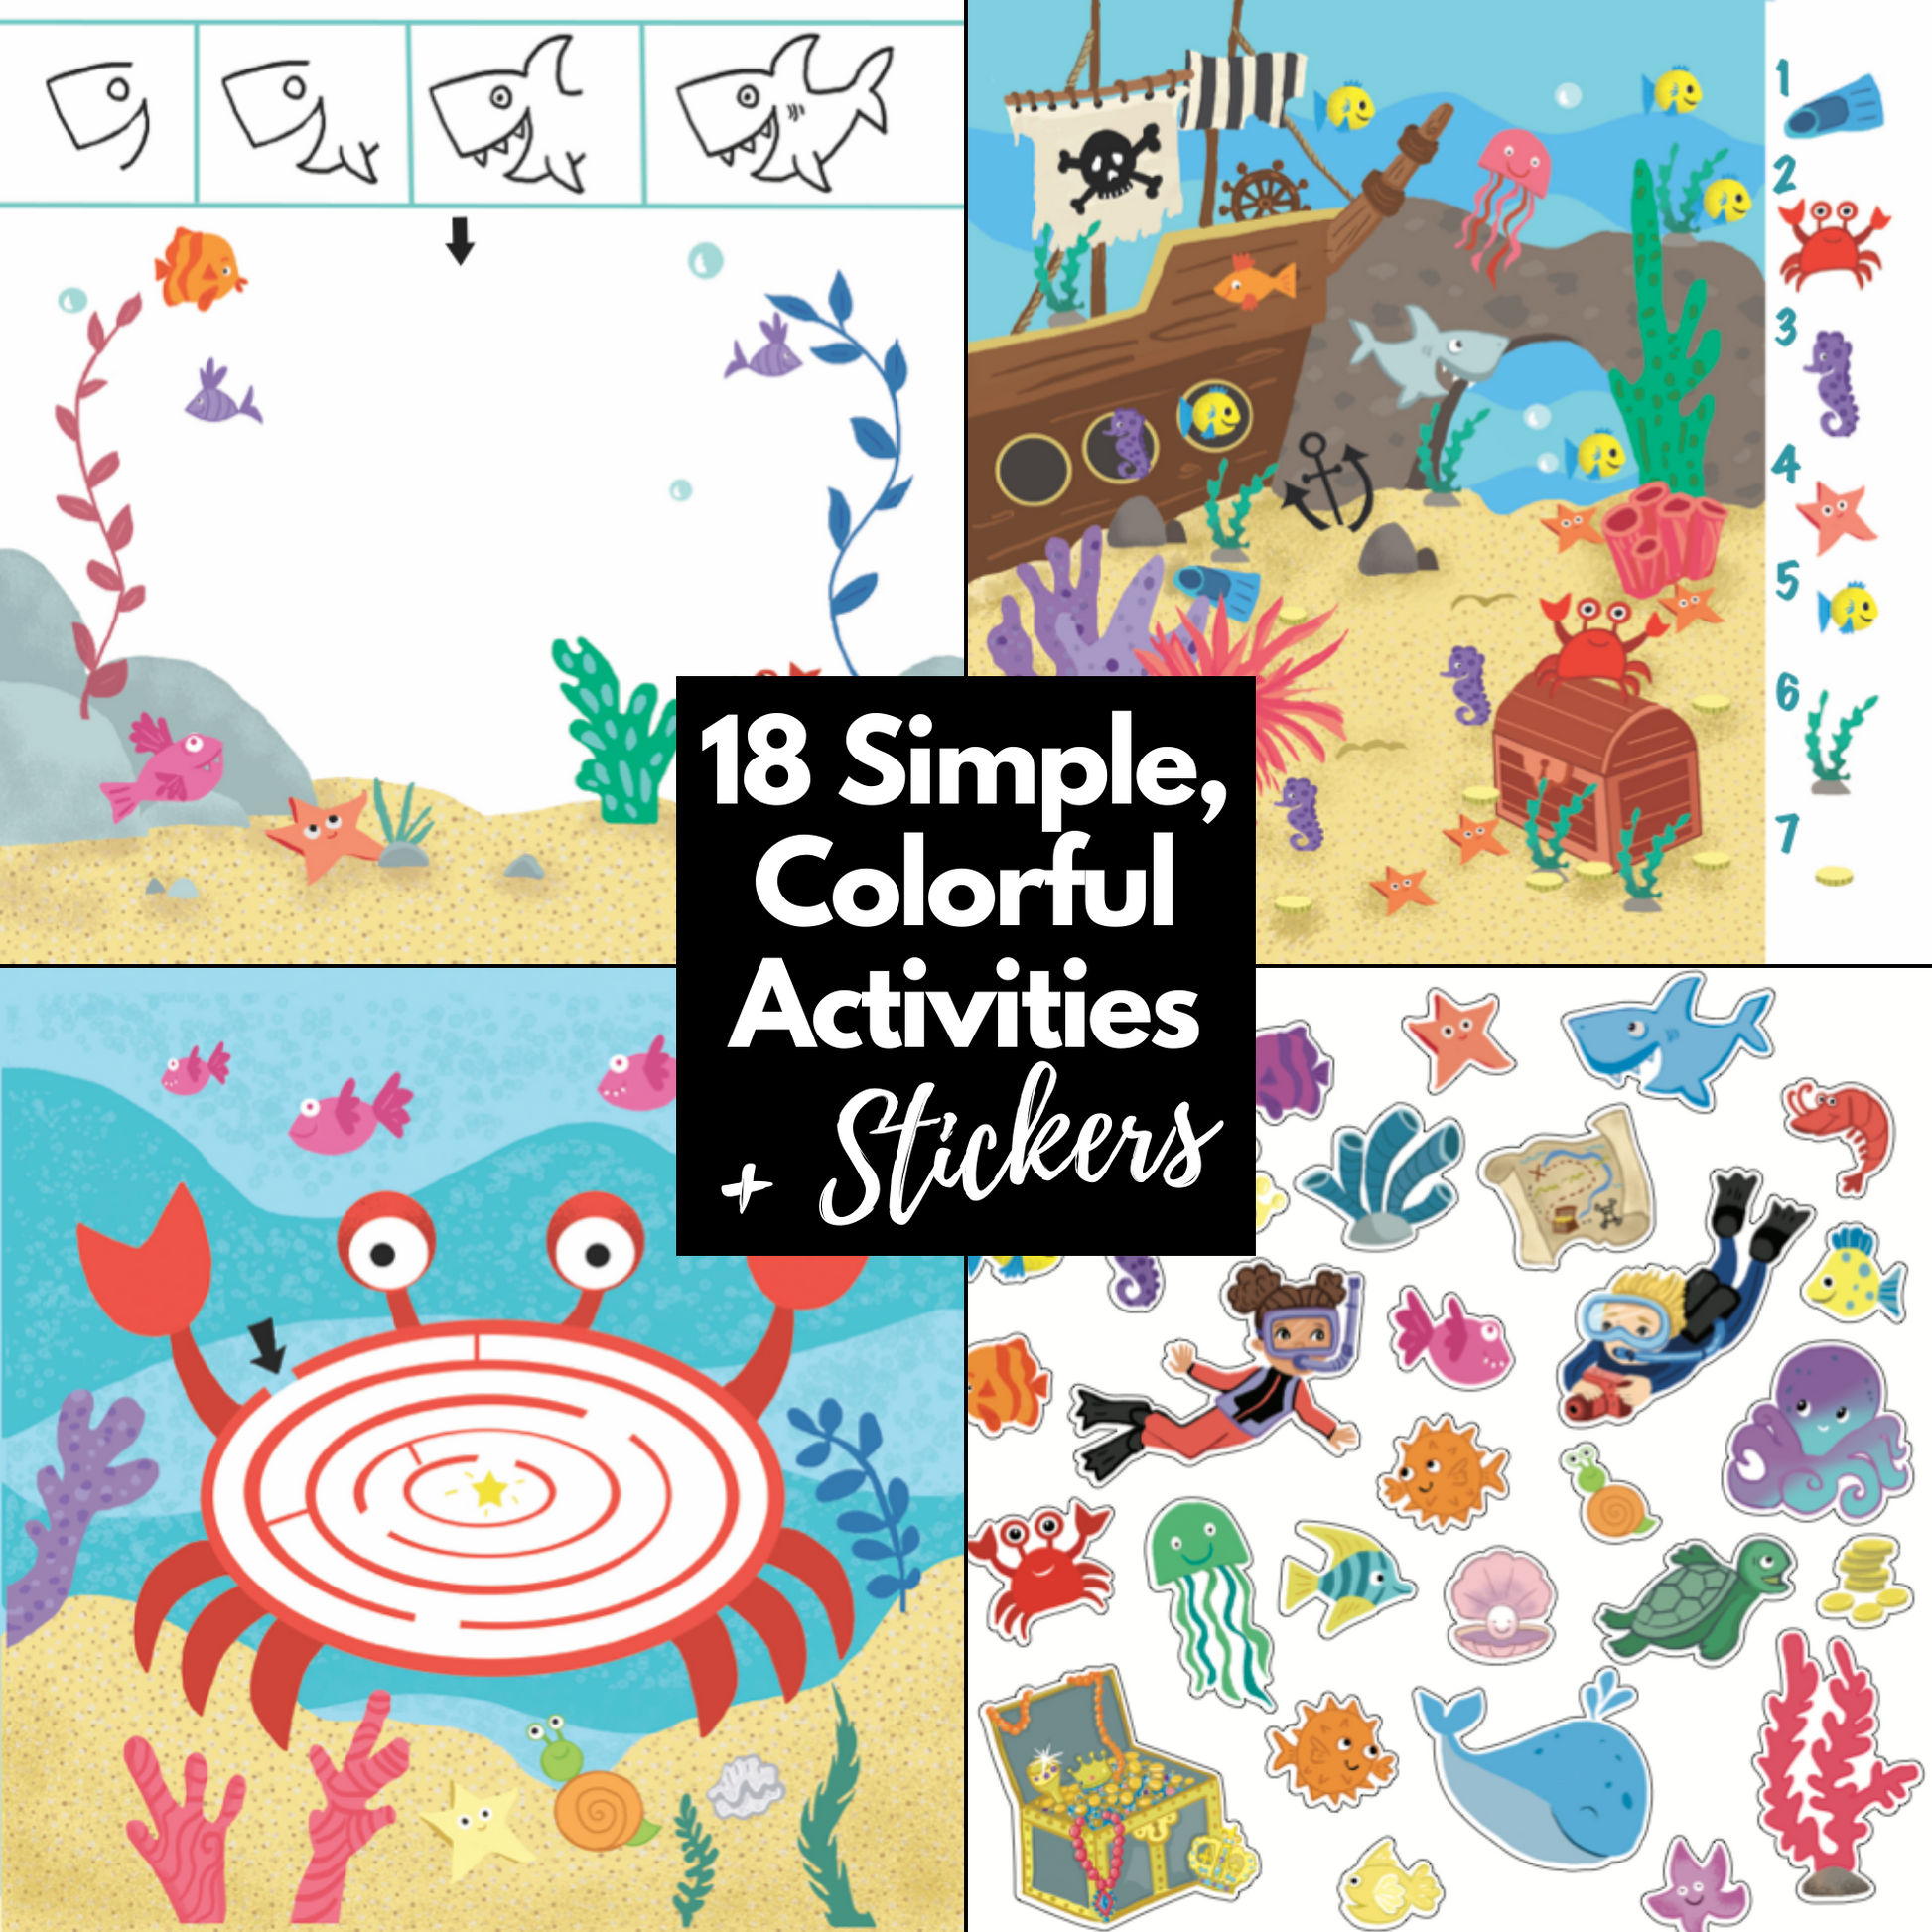  Totebook Dry Erase Kids Activity Book with Crayola Washable  Markers, Reusable Stickers- for Airplane or Car Travel, Ages 3, 4, 5, 6,  Search & Find, Tracing, Mazes (Jungle) : Toys & Games